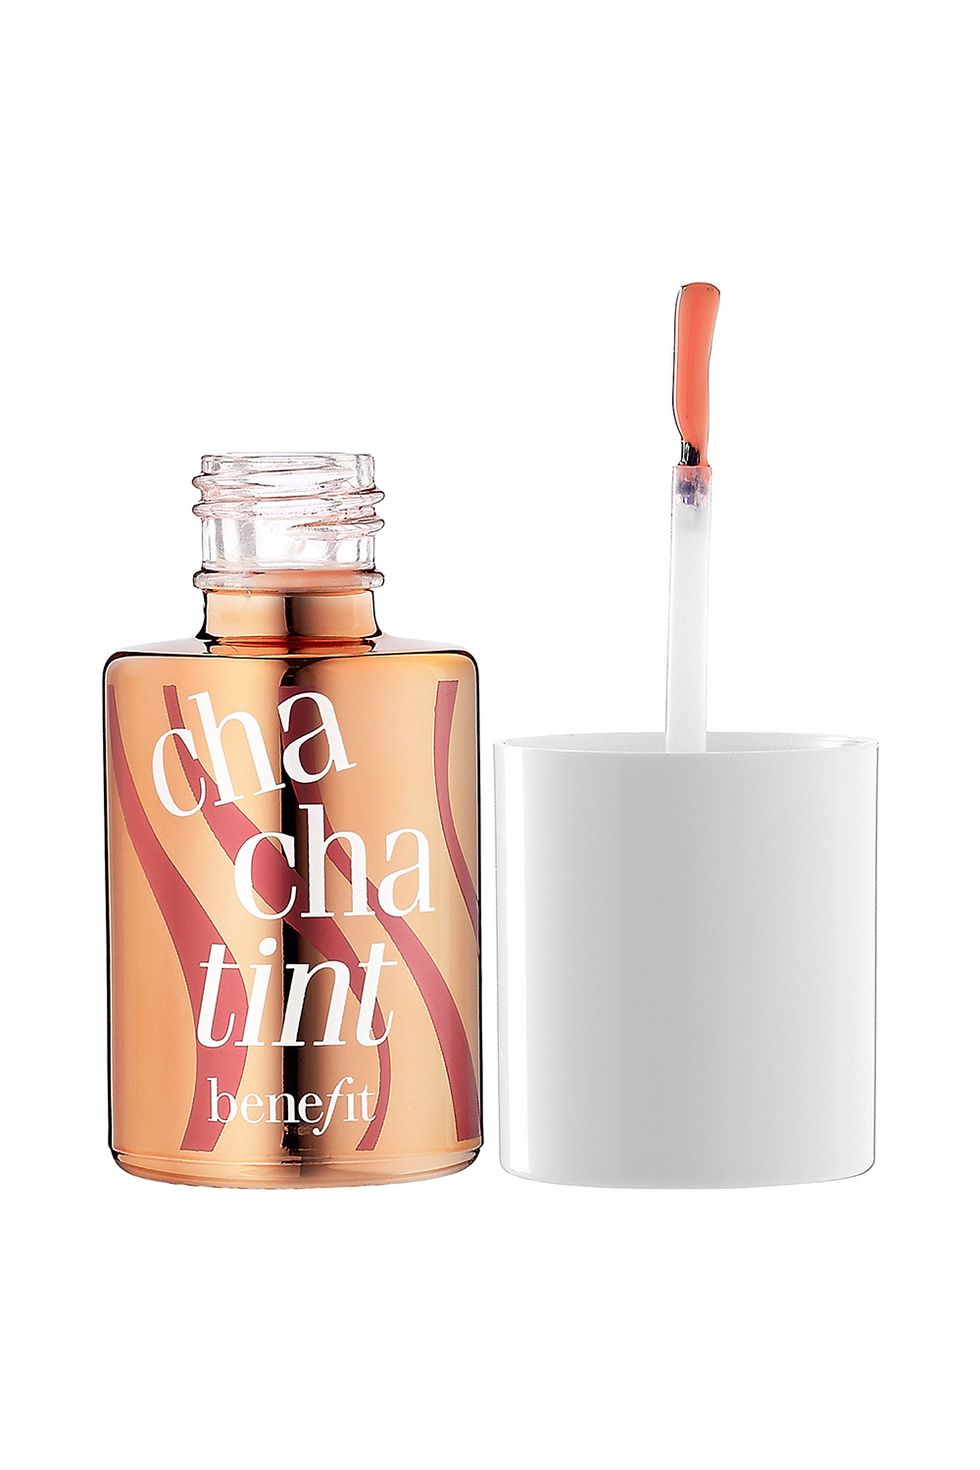 <p>What looks like a nail polish bottle contains one of the most celebrated lip stains out there. A little goes a long way: apply color to lips and cheeks using the little brush and blend to achieve a subtle  flush that highlights your natural color.</p><p><strong>Benefit Cosmetics Benetint Lip & Cheek Stain, $30</strong><strong>; <a href="http://www.sephora.com/benetint-cheek-lip-stain-P1272?om_mmc=aff-linkshare-redirect-QFGLnEolOWg&c3ch=Linkshare&c3nid=QFGLnEolOWg&affid=QFGLnEolOWg-Duiehq57lHRAHyiM1WkOLg&ranEAID=QFGLnEolOWg&ranMID=2417&ranSiteID=QFGLnEolOWg-Duiehq57lHRAHyiM1WkOLg&ranLinkID=15-1&browserdefault=true">sephora.com</a>. </strong><strong></strong></p>